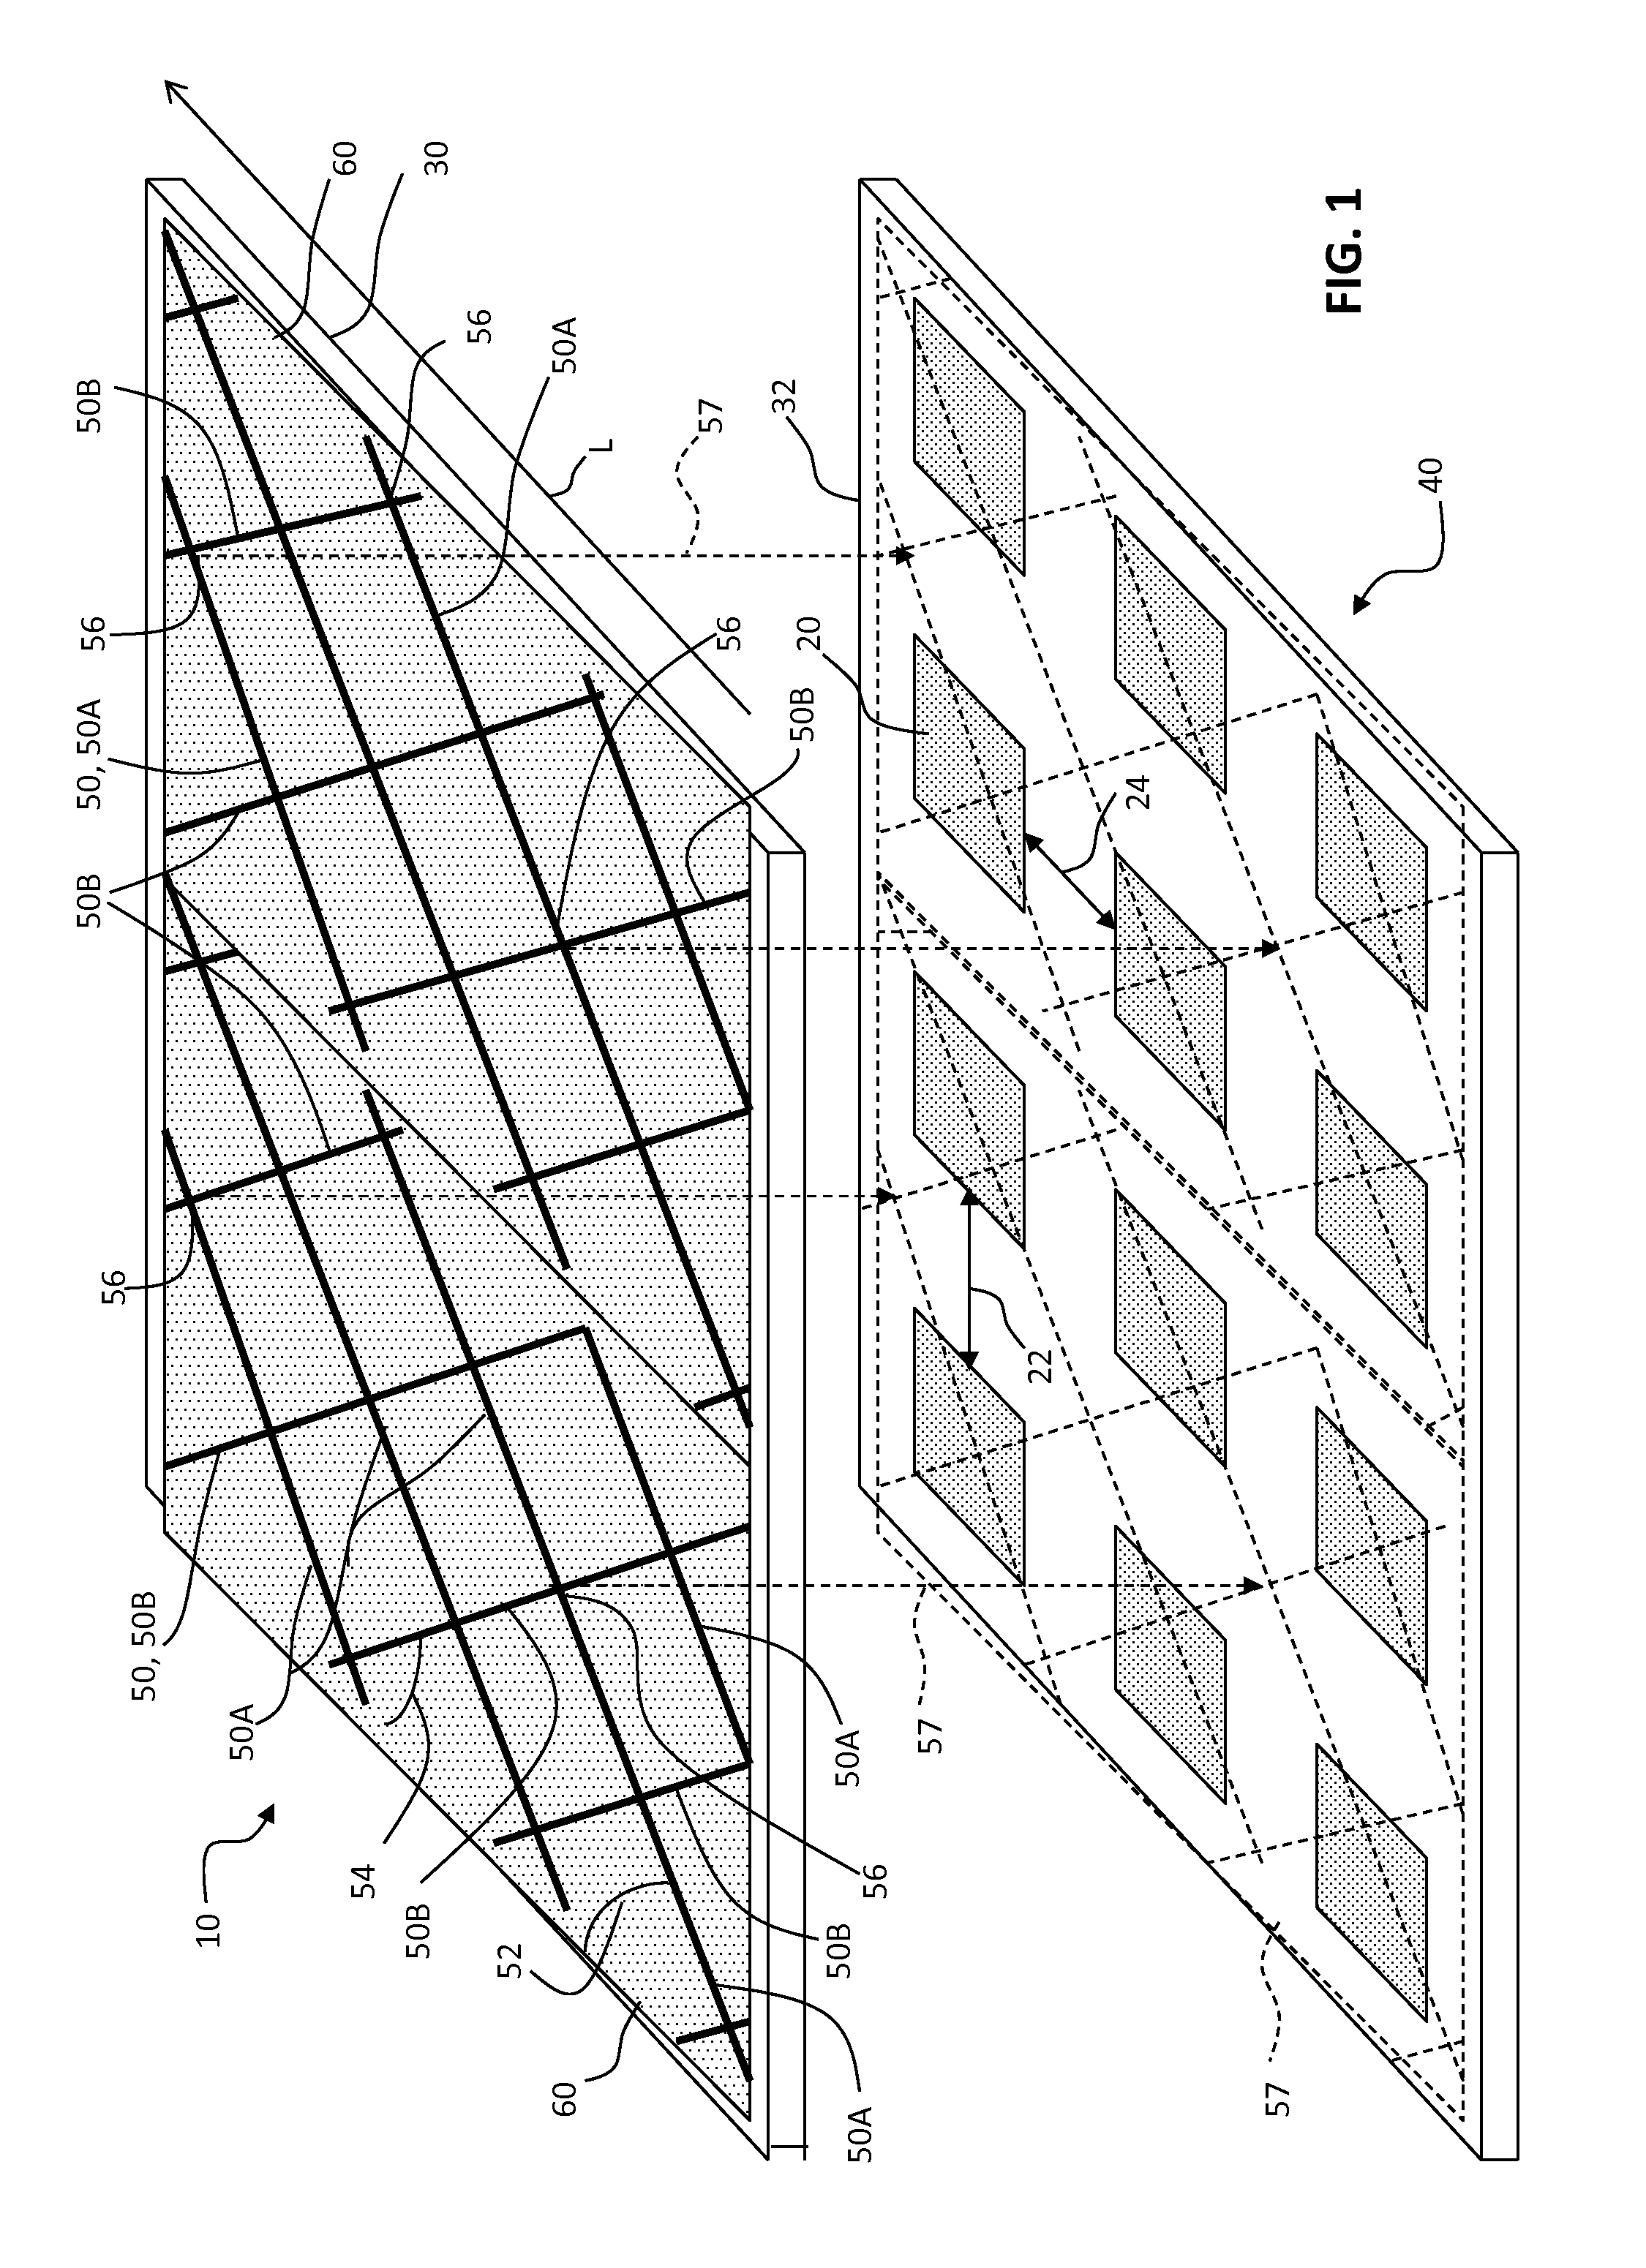 Display apparatus with diamond-patterned micro-wire electrode